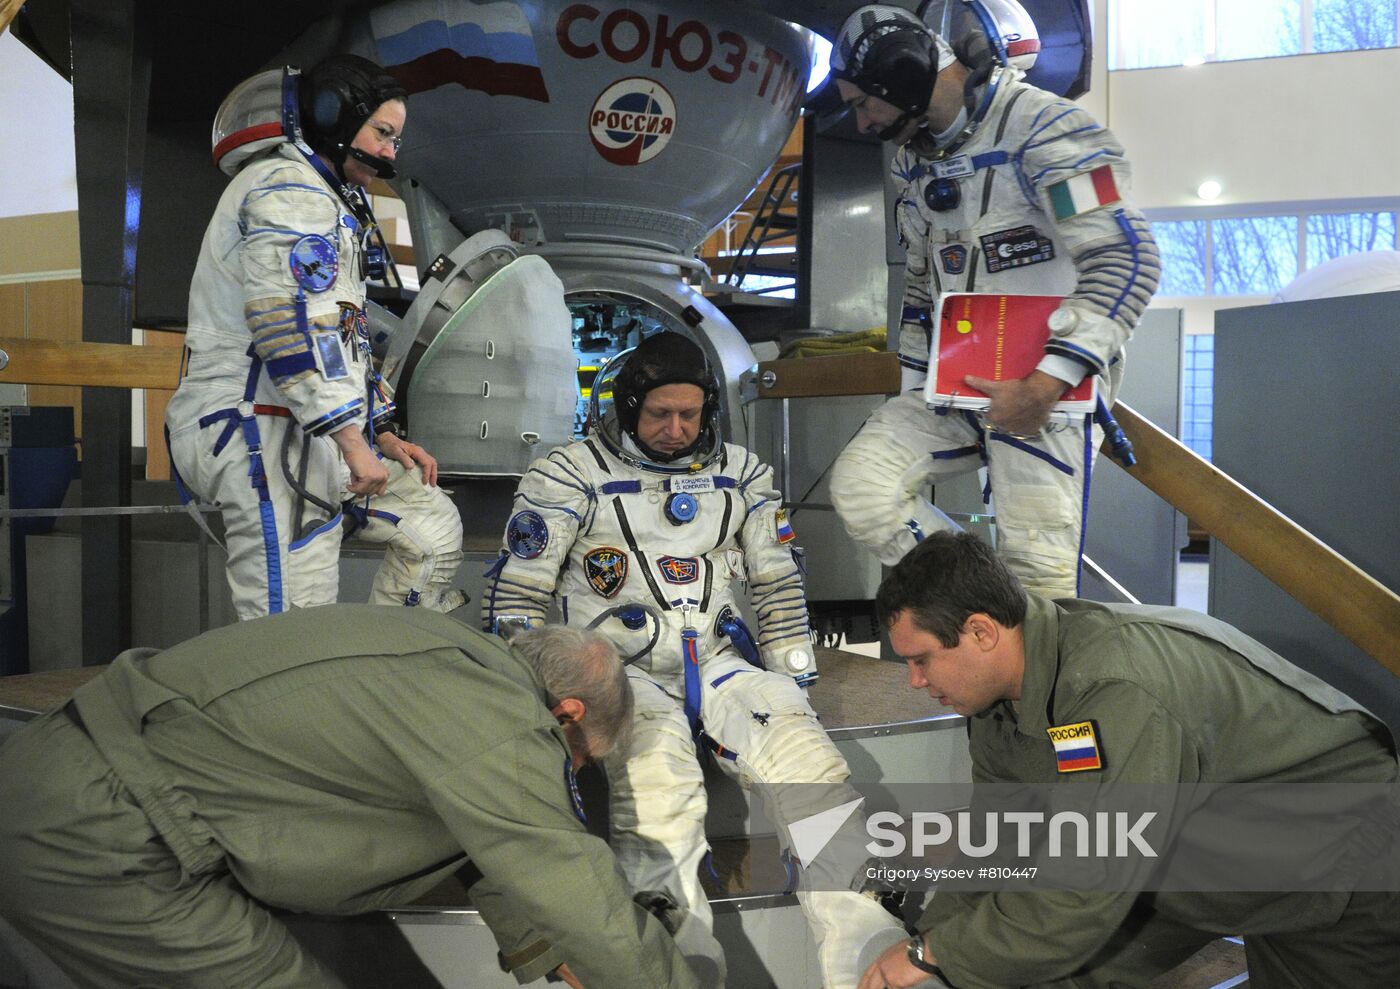 Crews of ISS Expeditions 26 and 27 in training